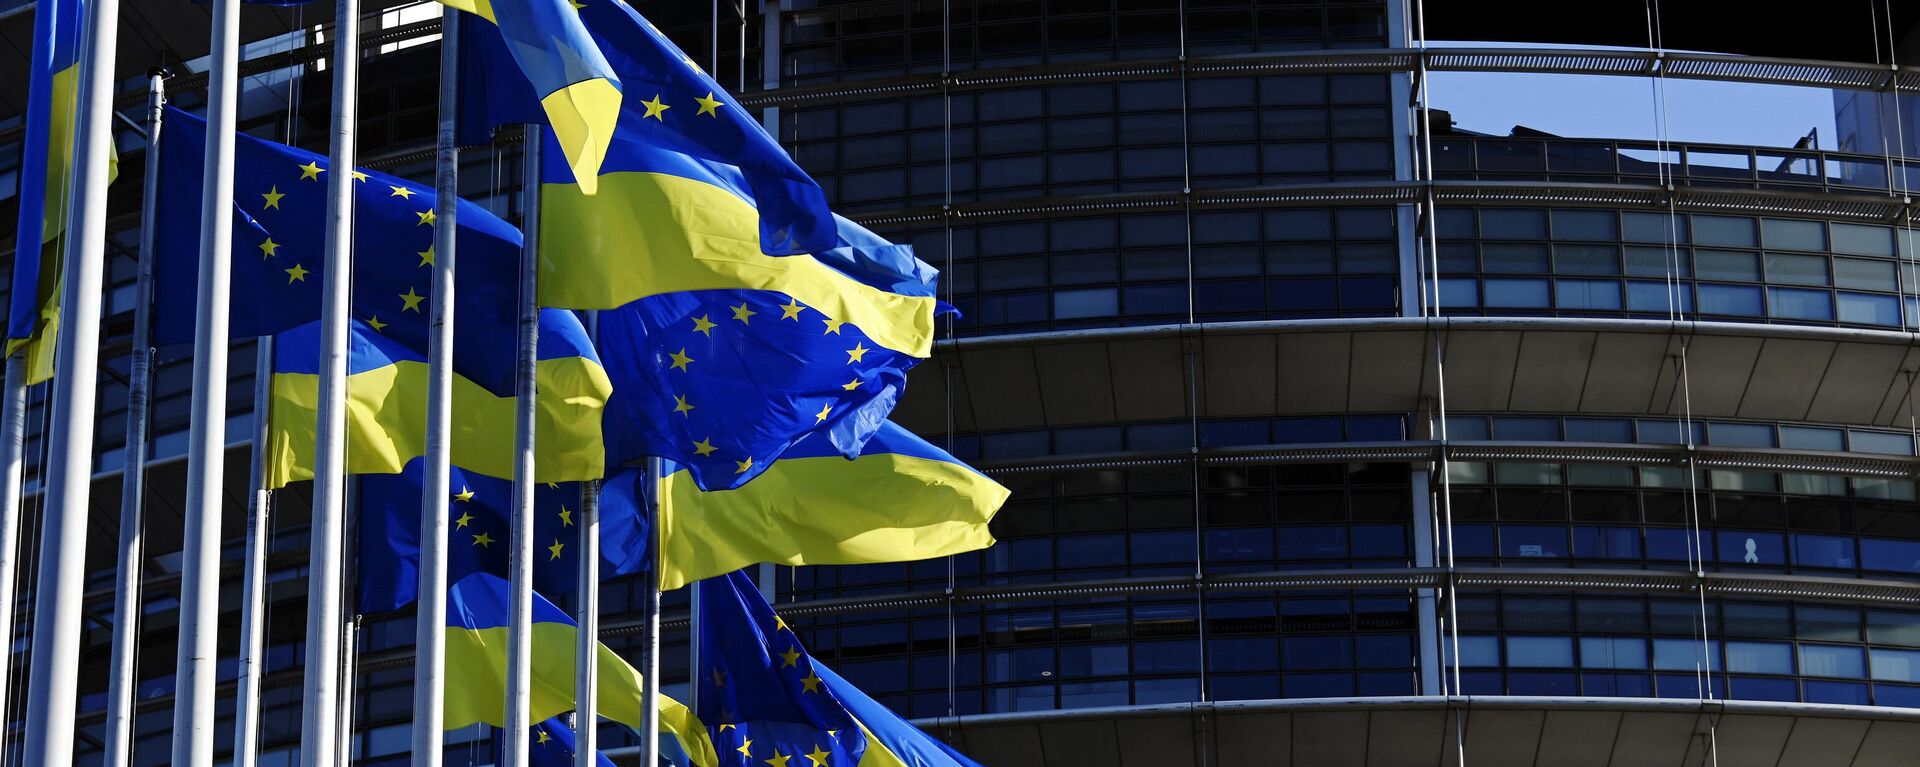 A picture taken on March 8, 2022 shows European Union's and Ukrainian flags fluttering outside the European Parliament in Strasbourg, eastern France. - Sputnik International, 1920, 19.03.2022